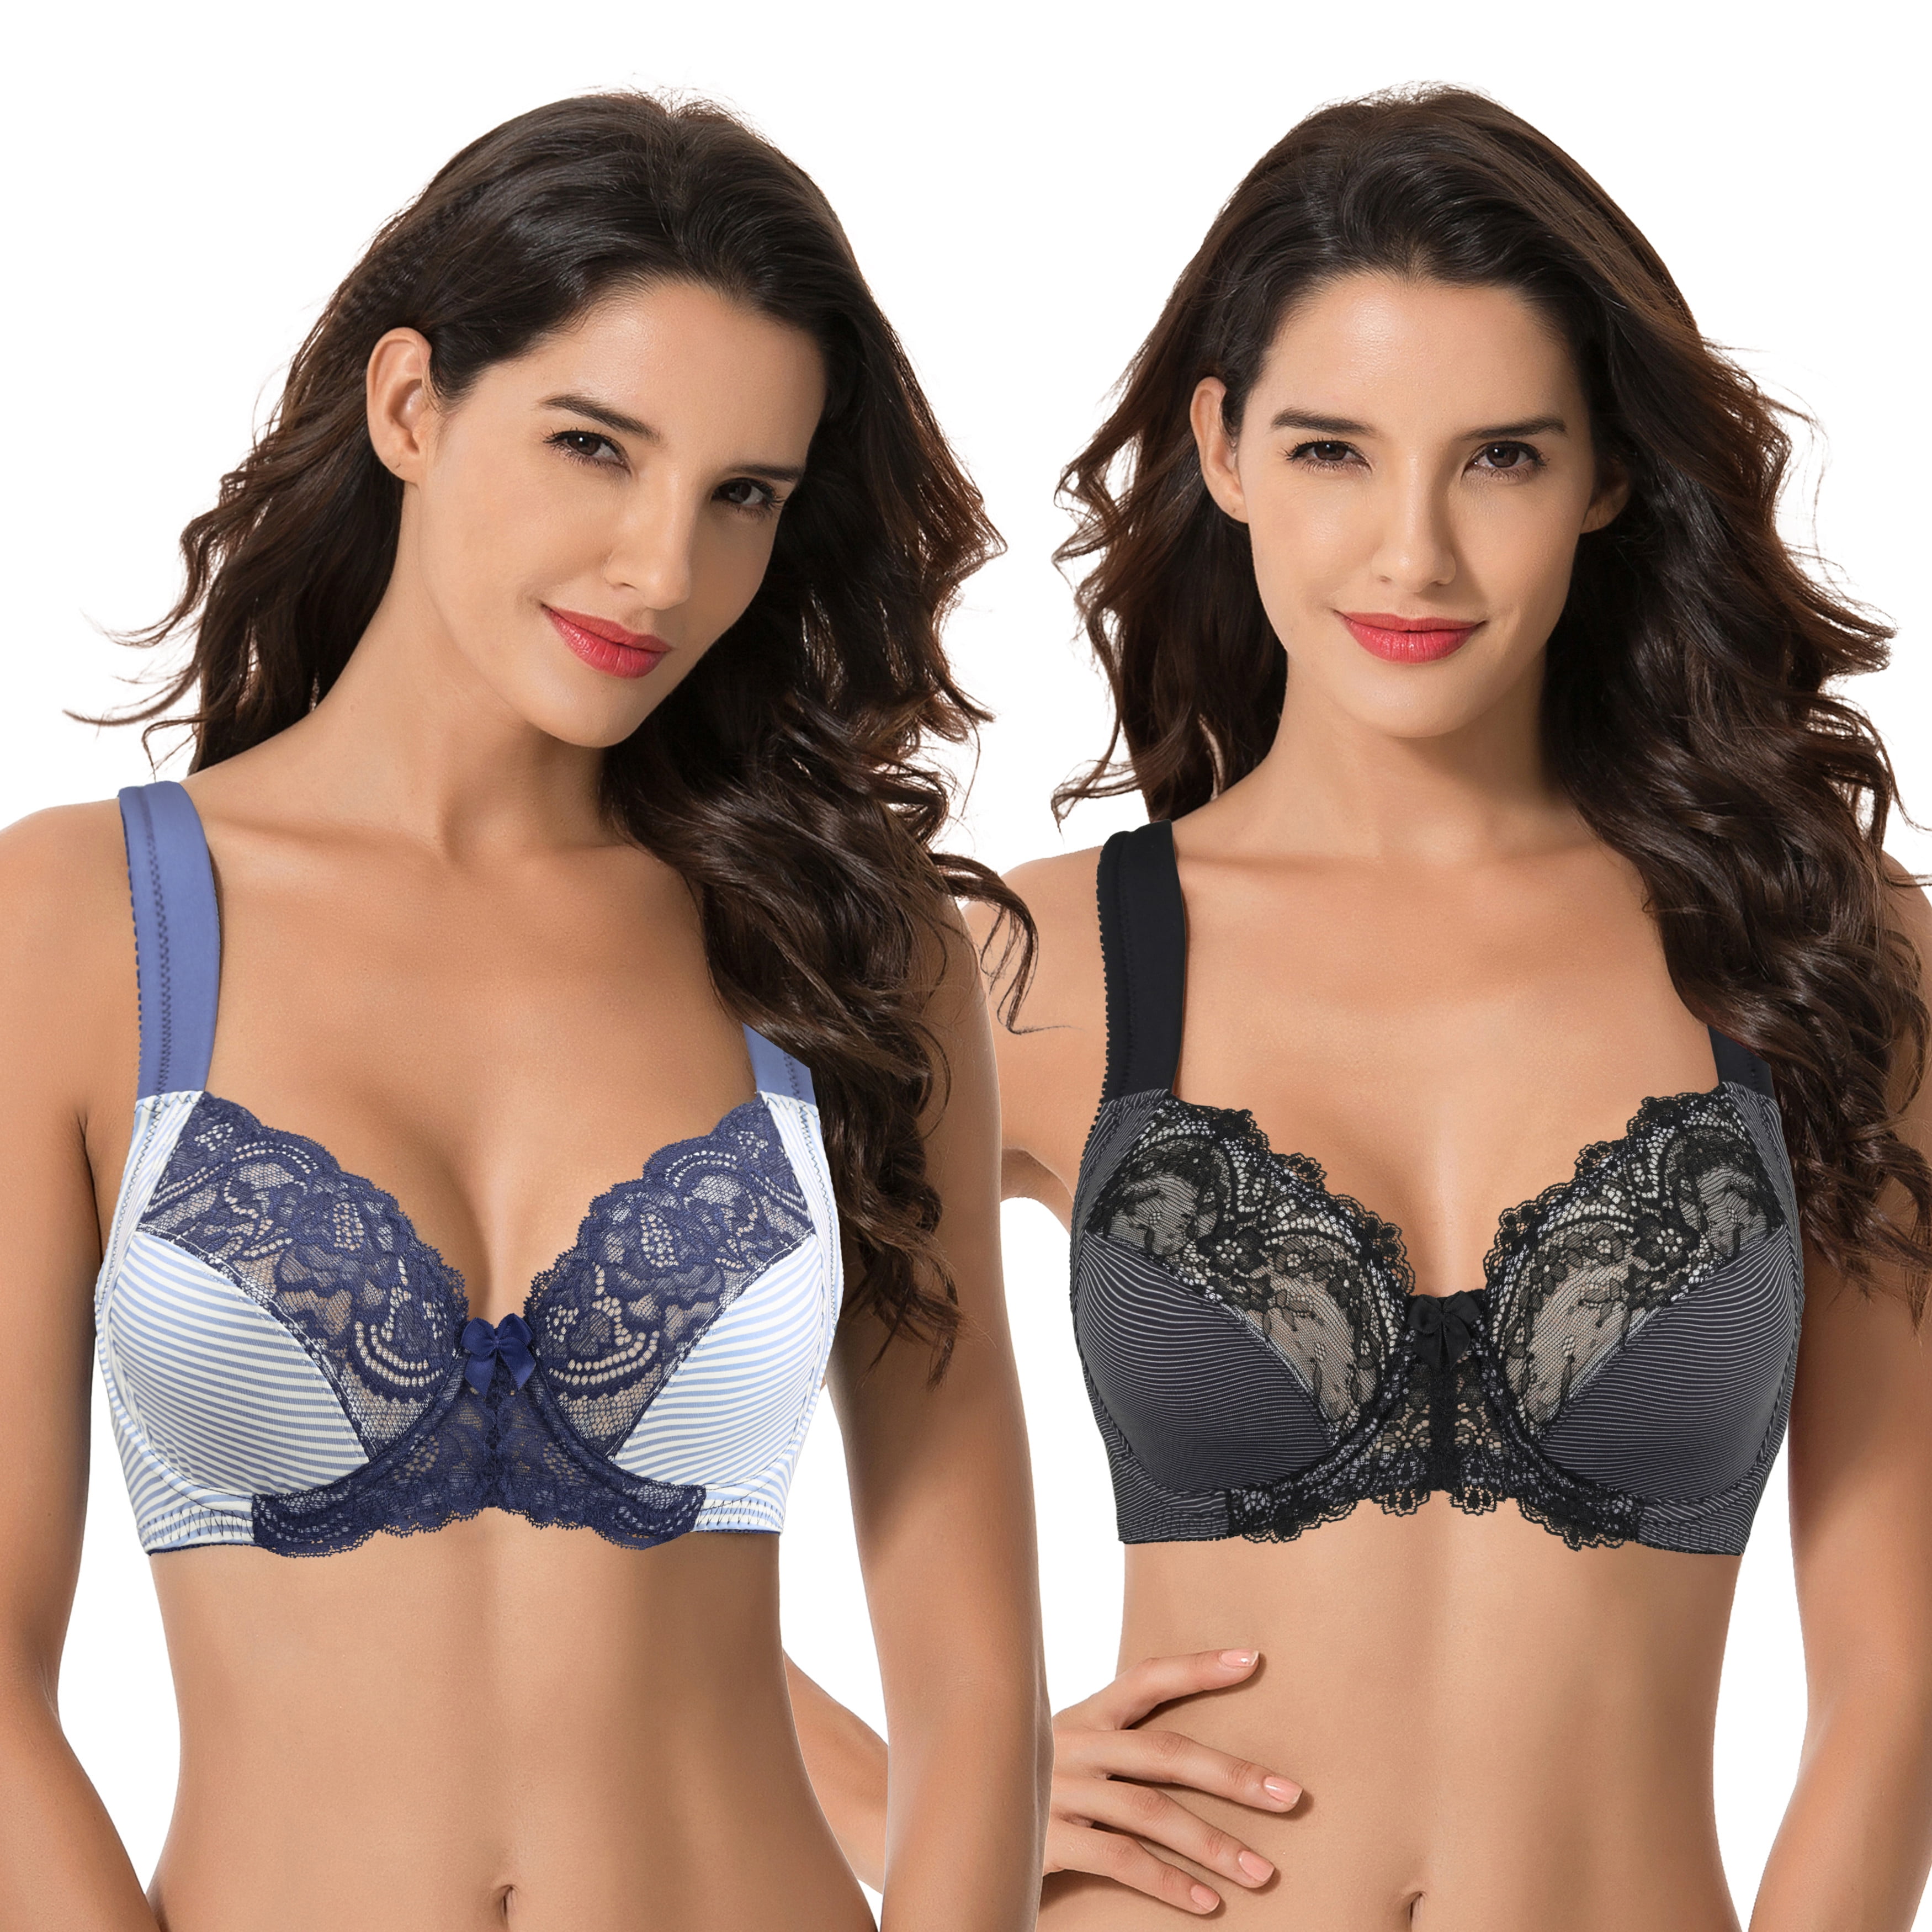 Curve Muse Women's Plus Size Unlined Underwire Lace Bra with Cushion  Straps- GREY PRINT, NAVY PRINT- Size:42D